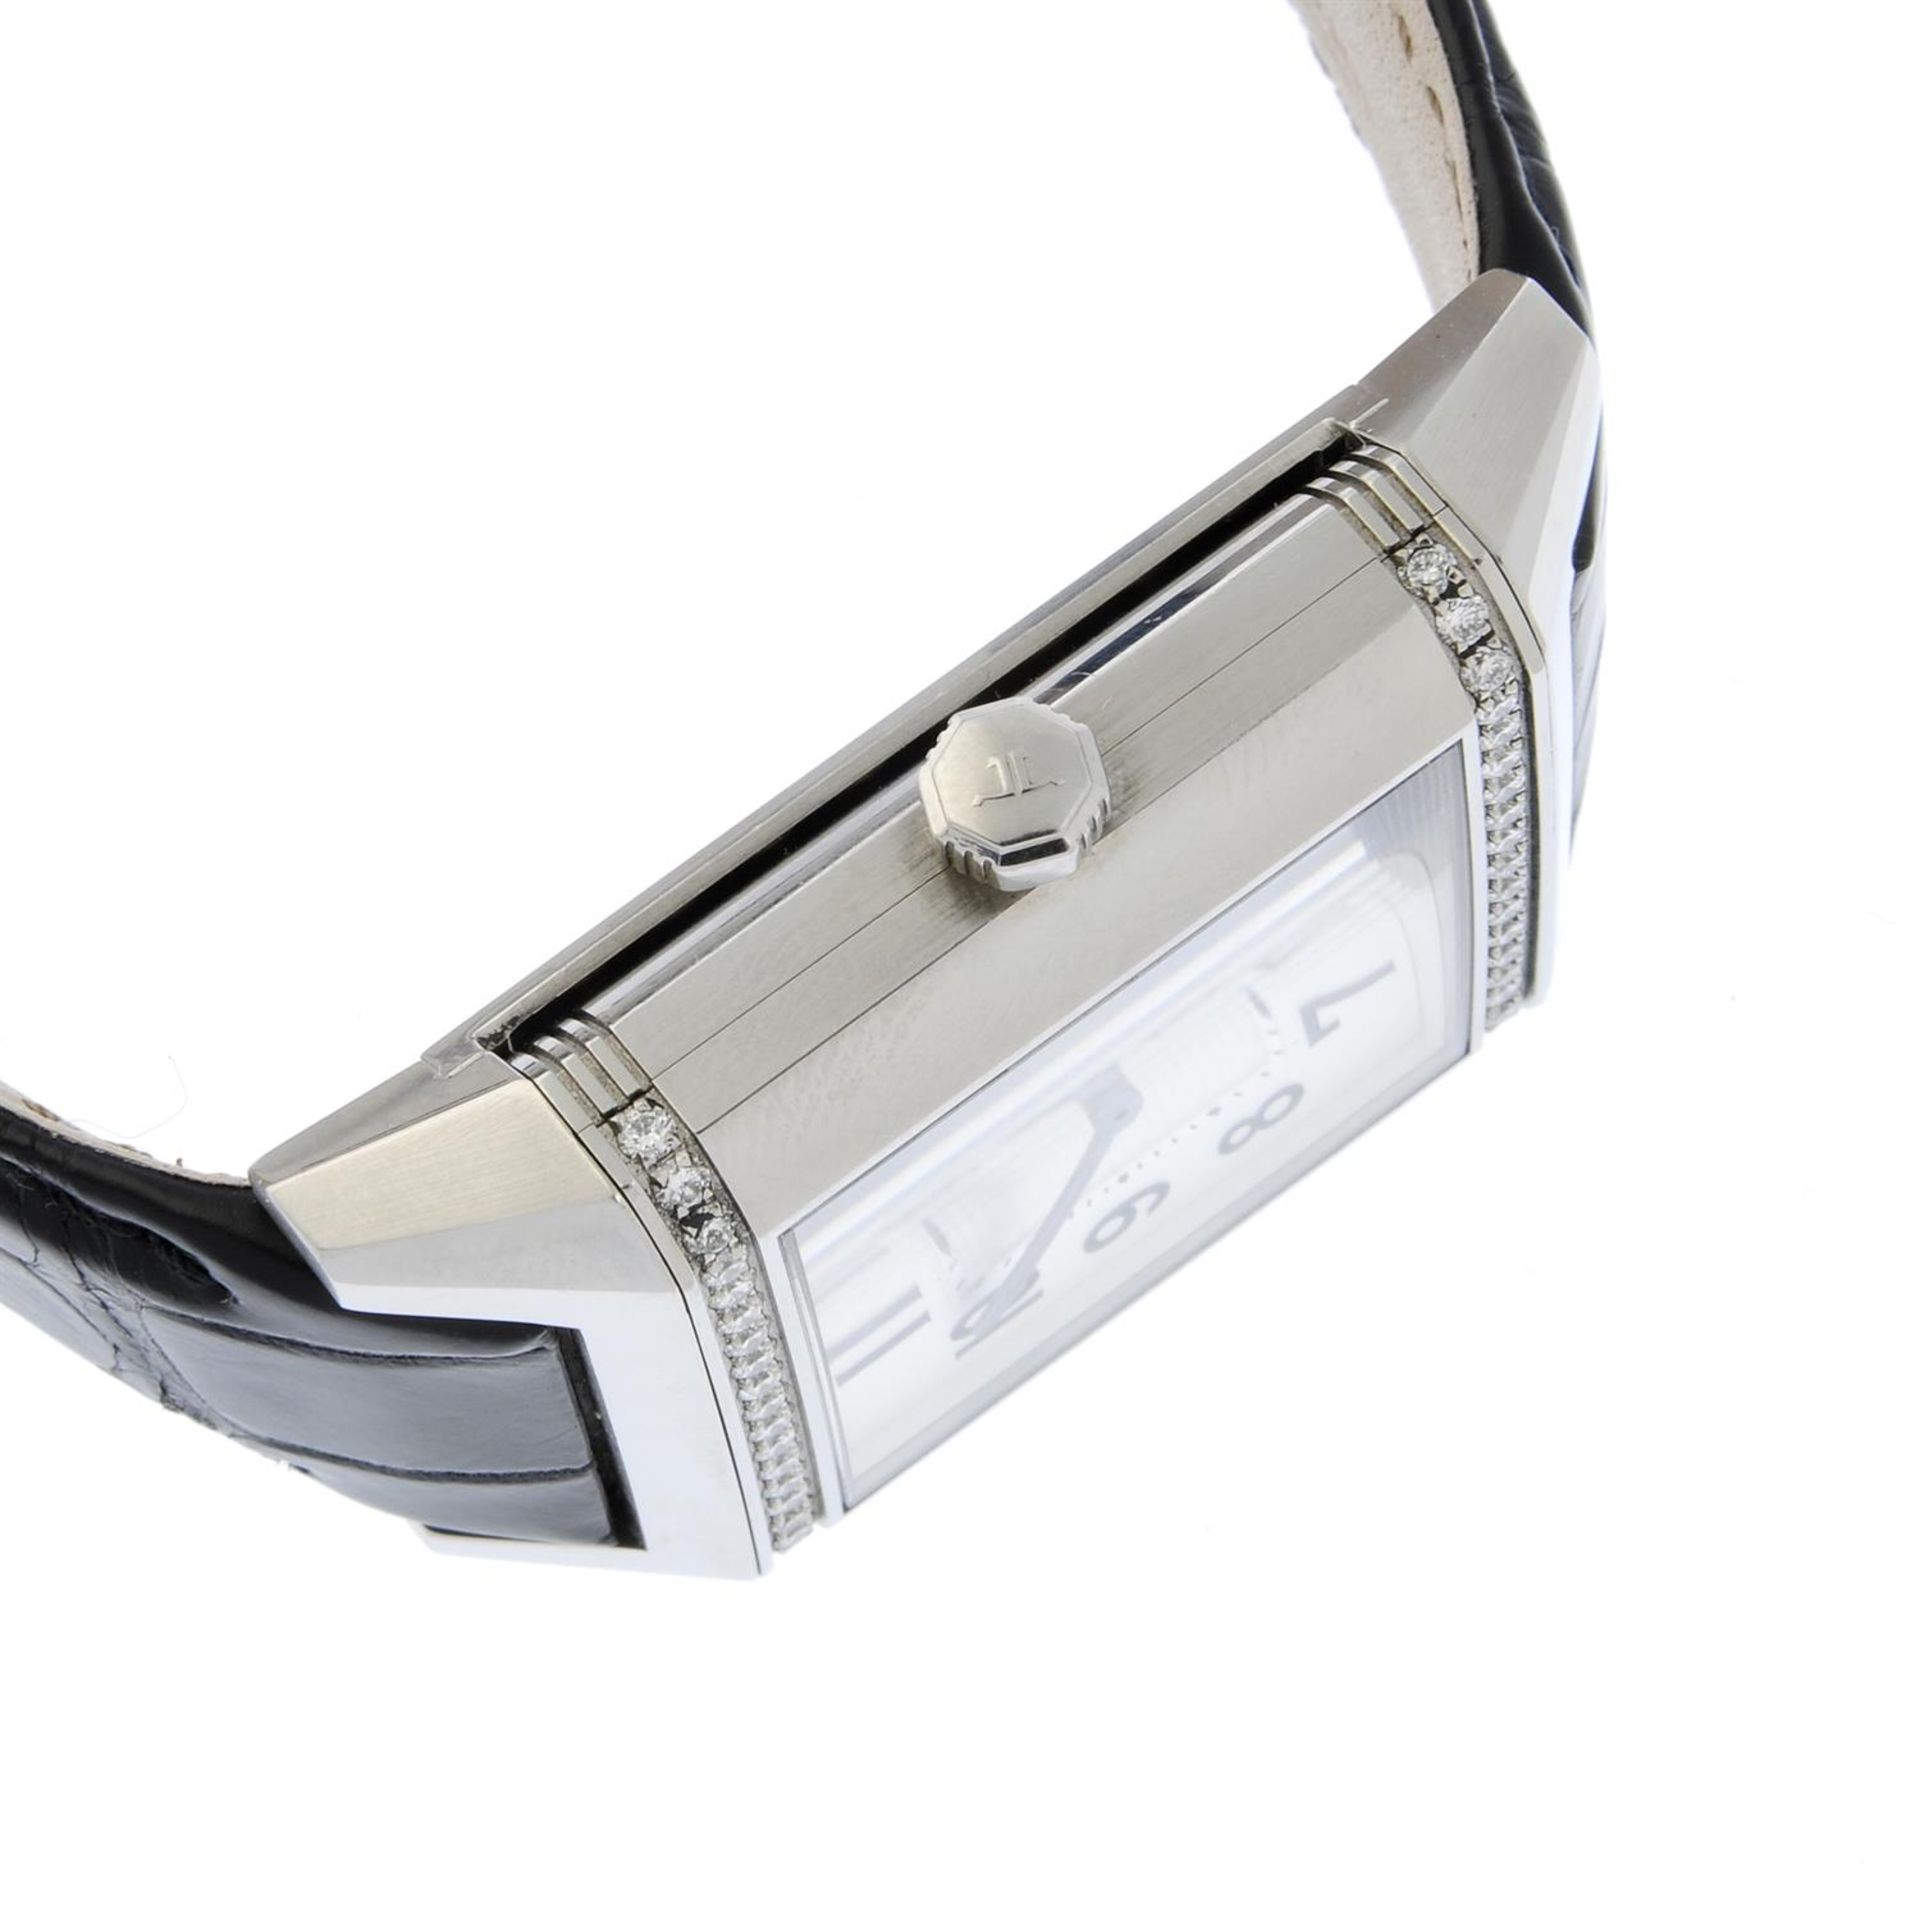 JAEGER-LECOULTRE - a factory diamond set stainless steel Reverso Squadra wrist watch, 31x35mm. - Image 3 of 6